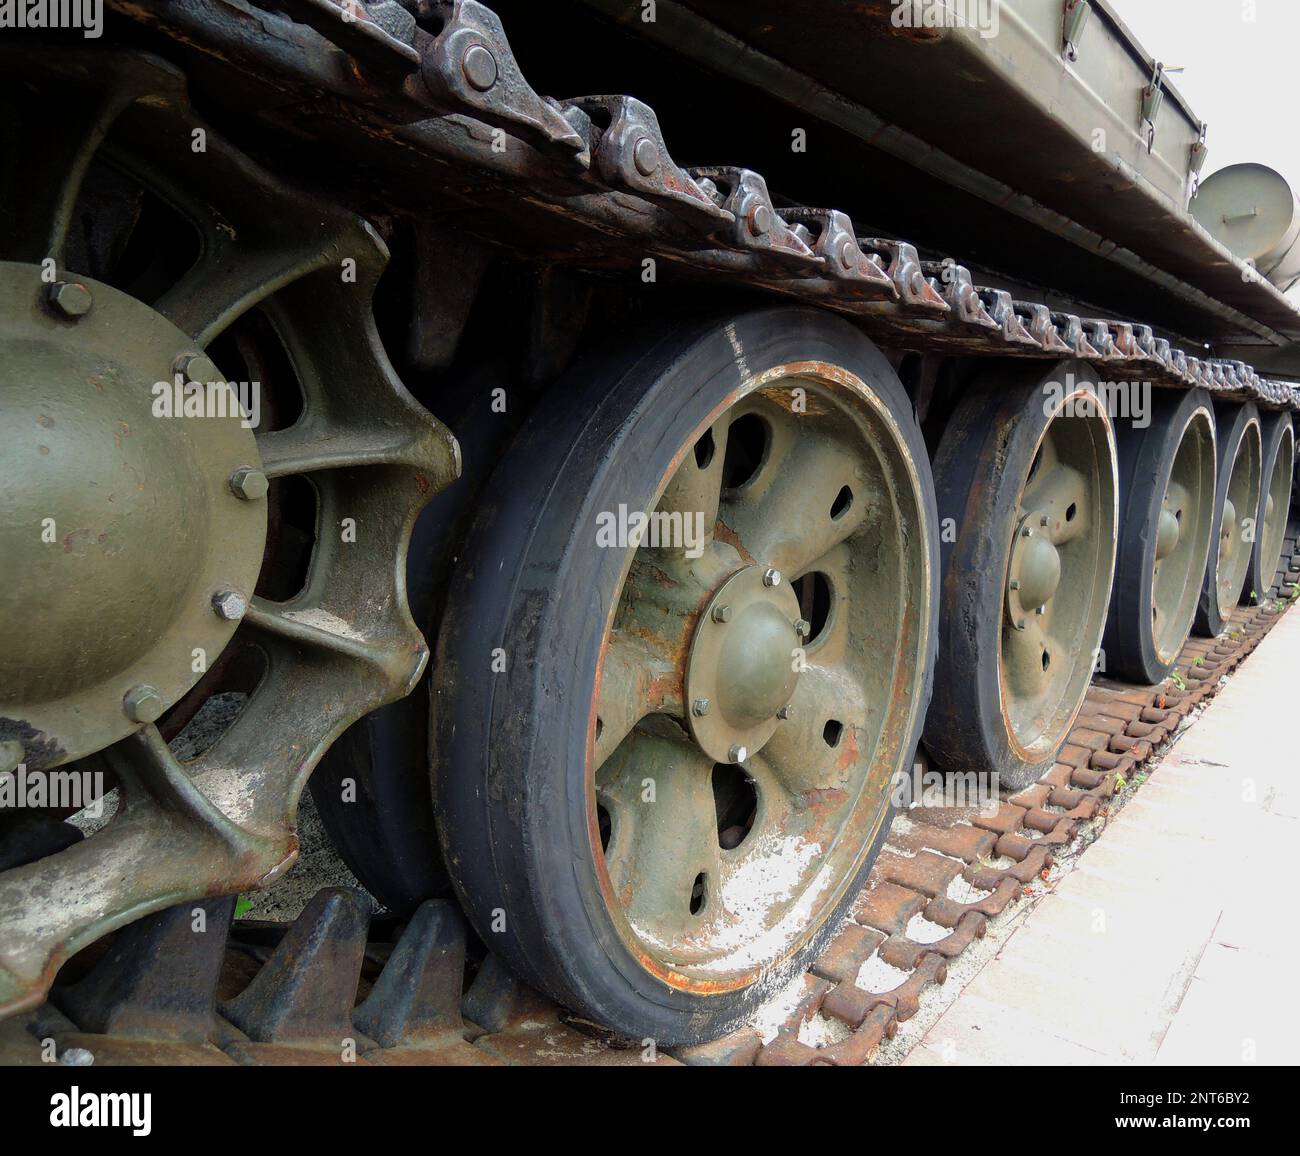 Tracks and rollers of a tracked tank packed with sand with traces of rust Stock Photo